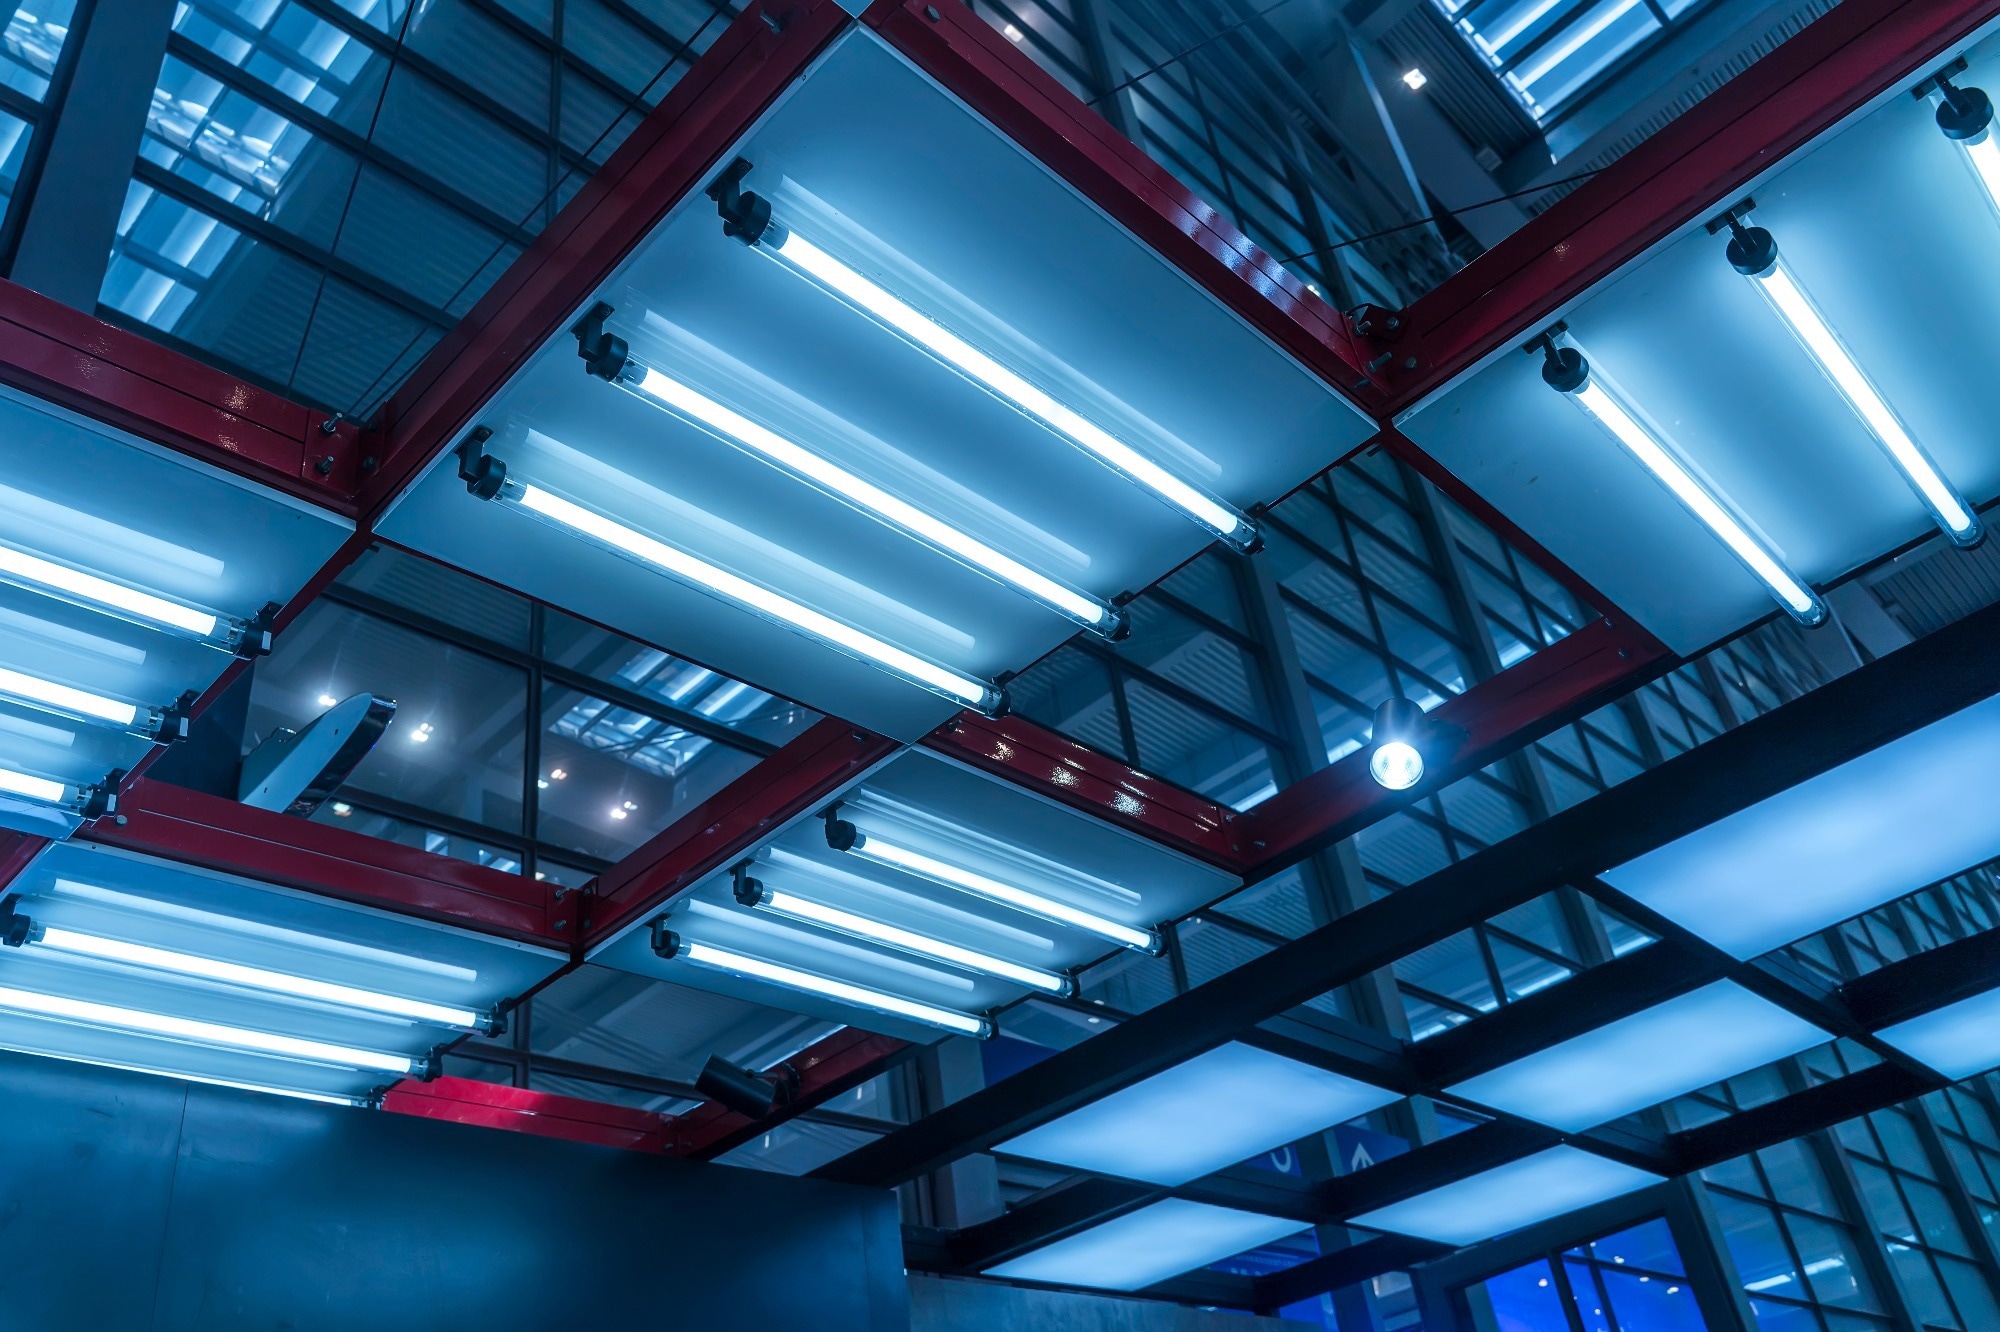 The Fundamentals of Human-Centric LED Lighting and Its Impact